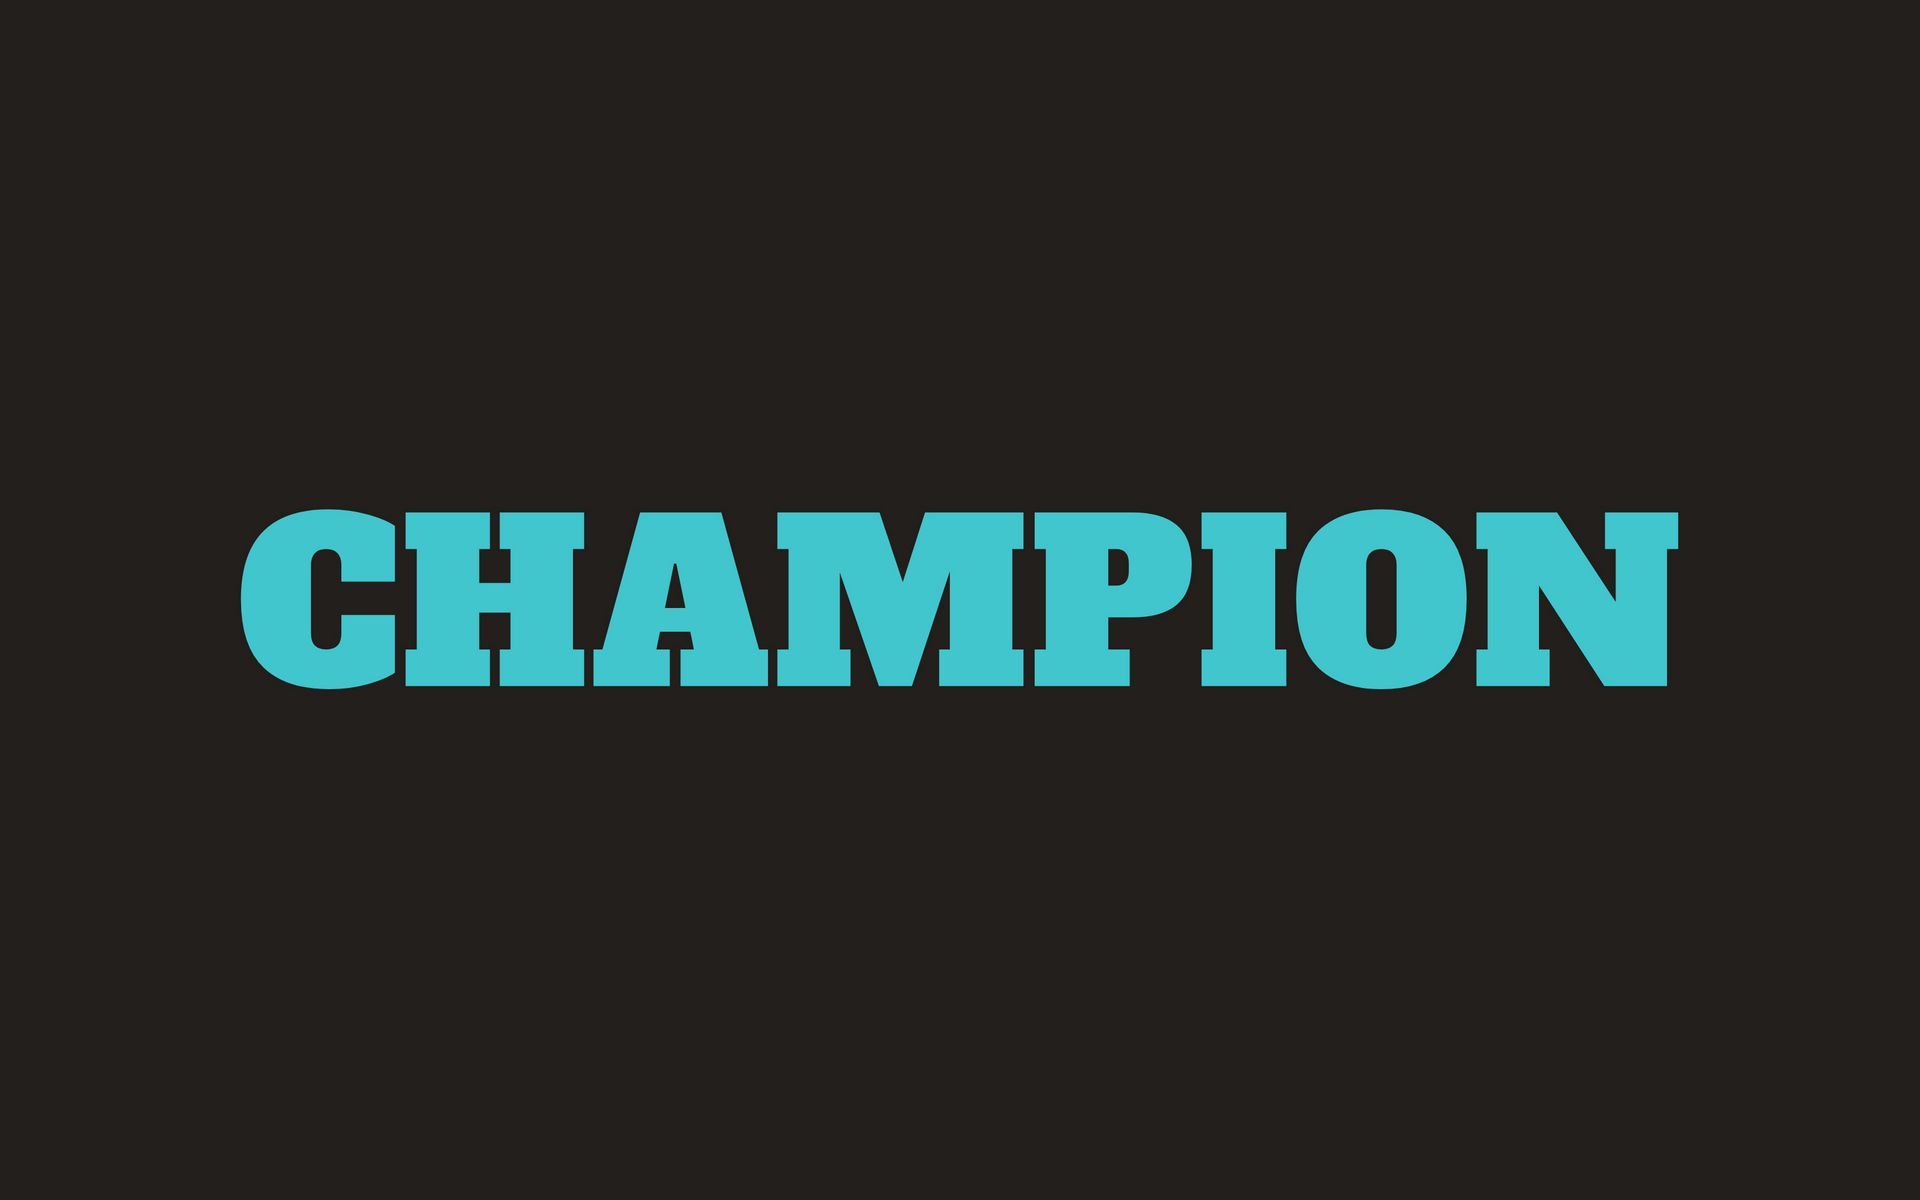 Champion Computer Wallpapers - Wallpaper Cave